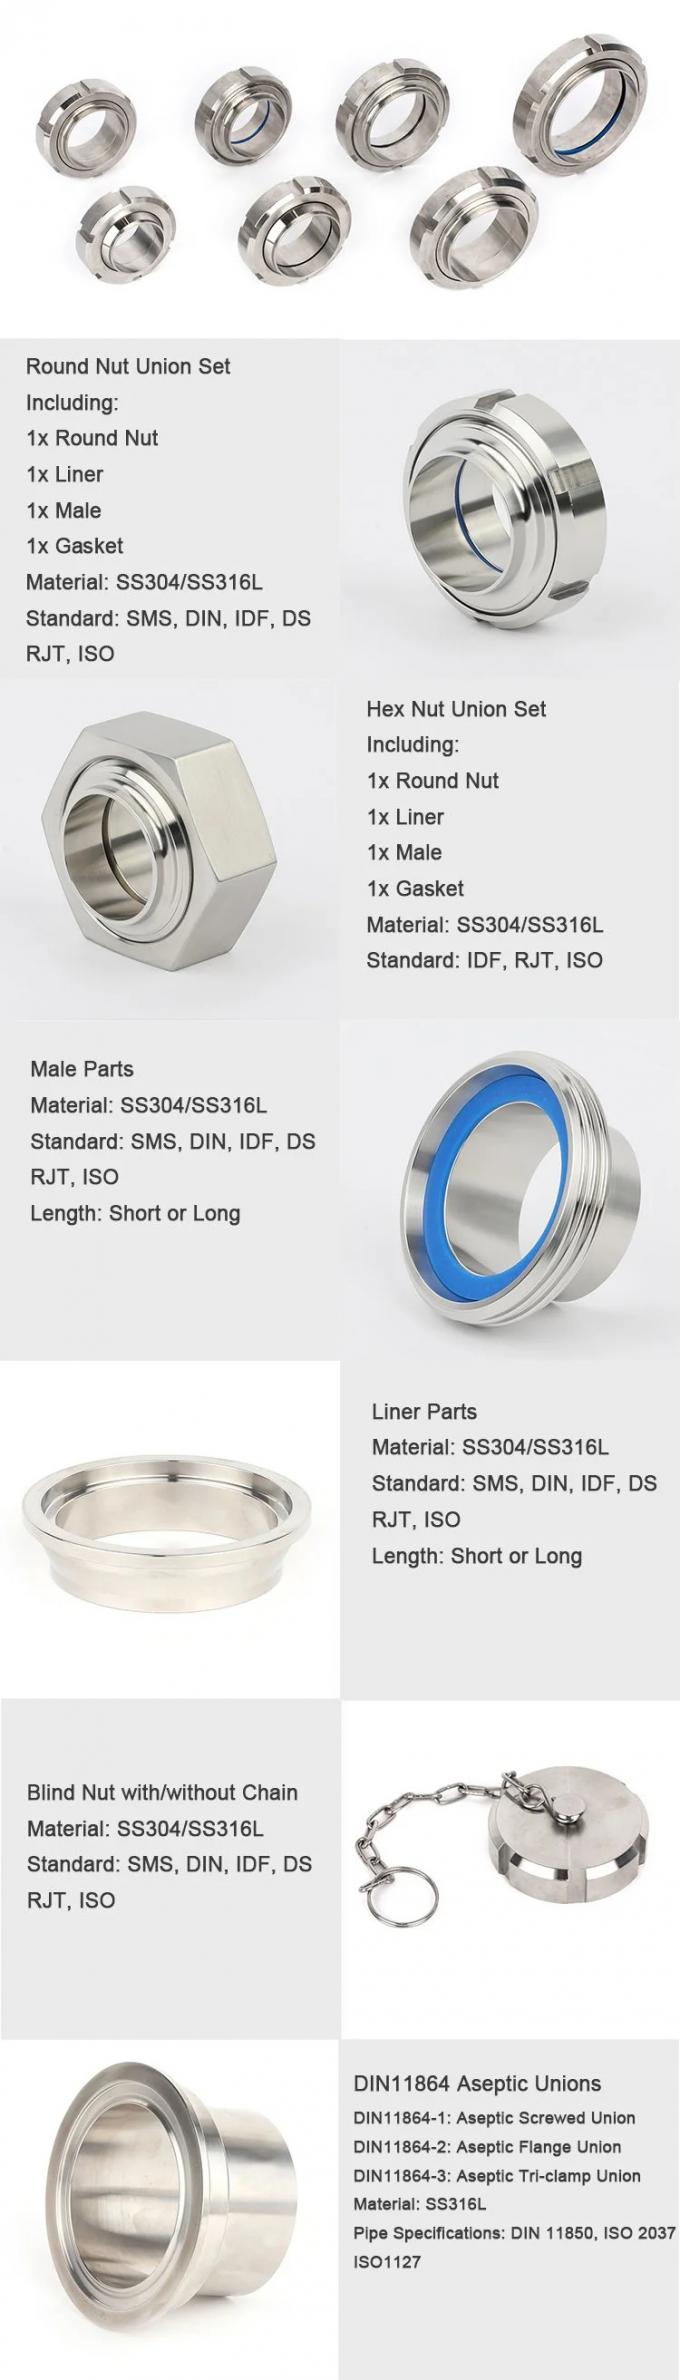 304 316L Stainless Steel Sanitary Hygienic Unions welded Connection for Pipe Systems 1